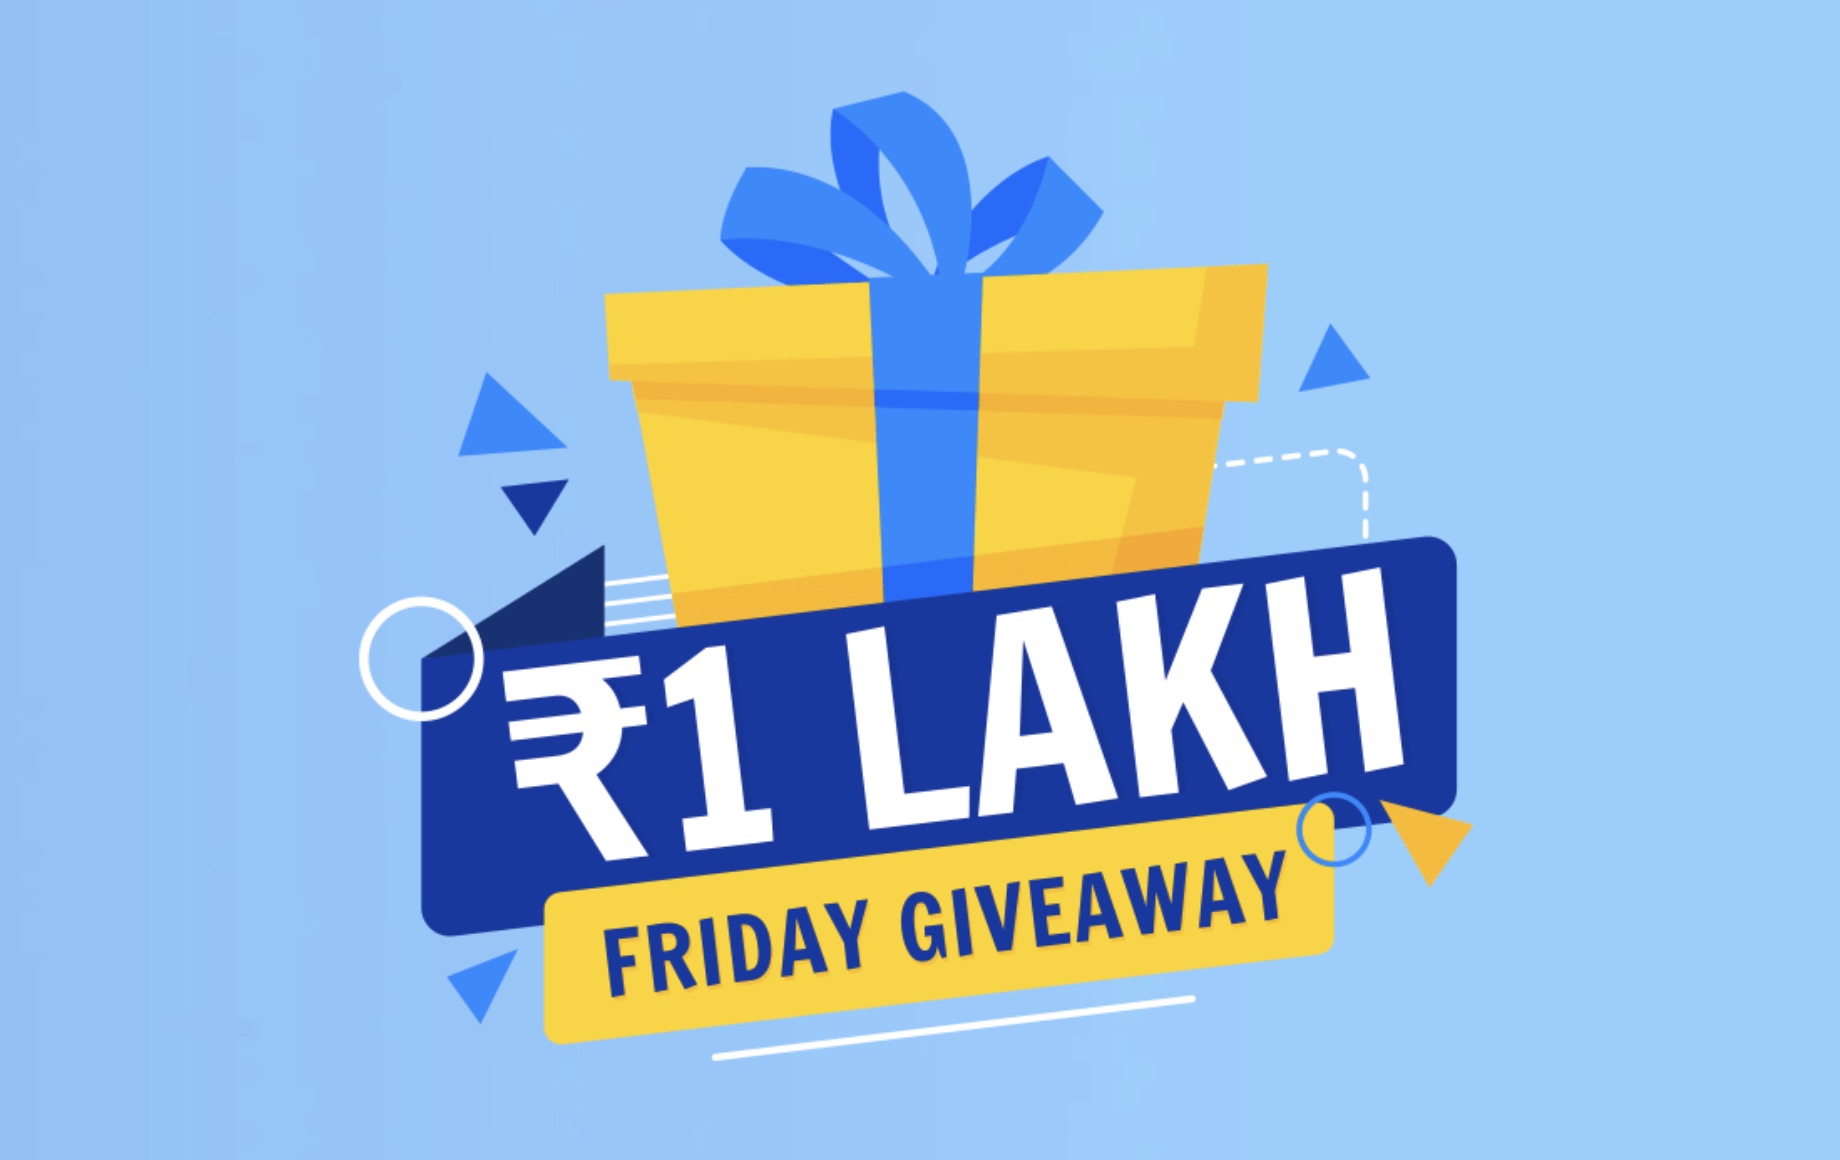 ComeOn Friday Giveaway Voucher